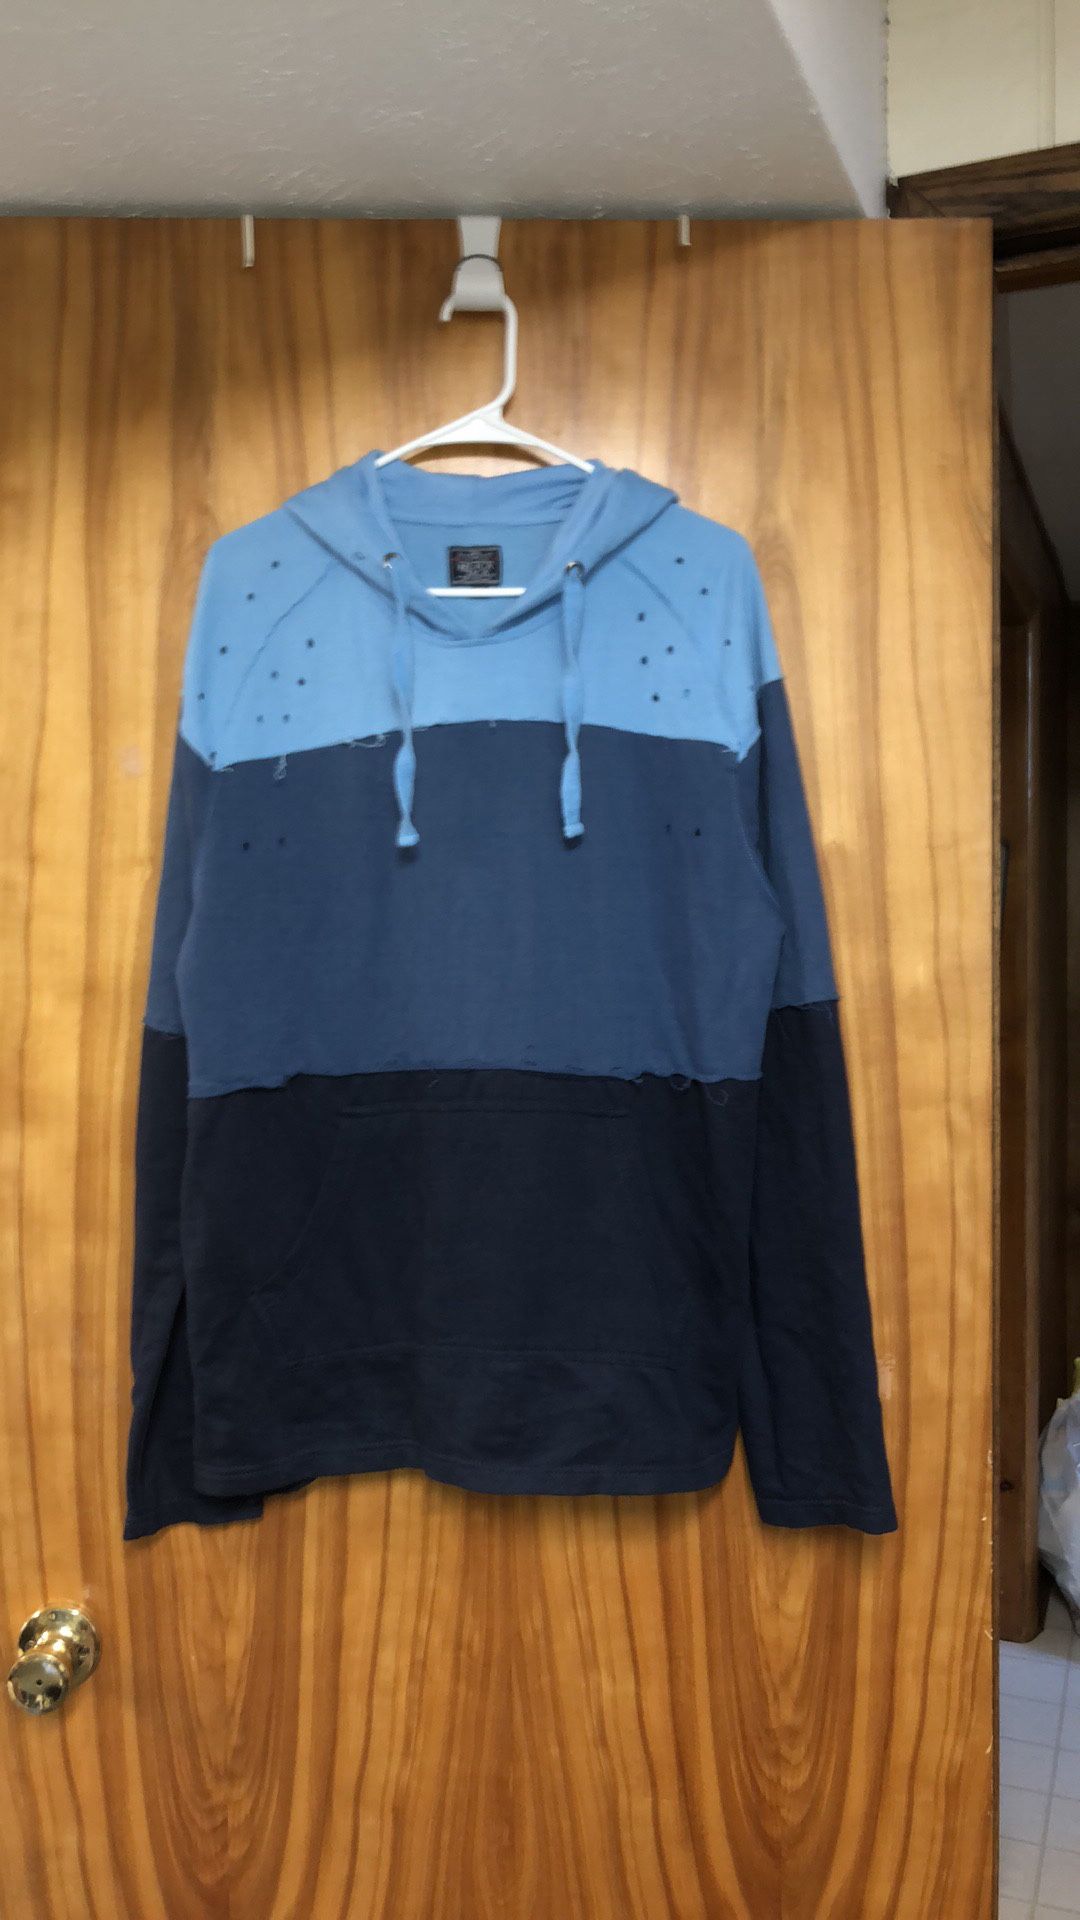 Men’s size XL 3 shades of blue, hoodie shirt with holes made at the top